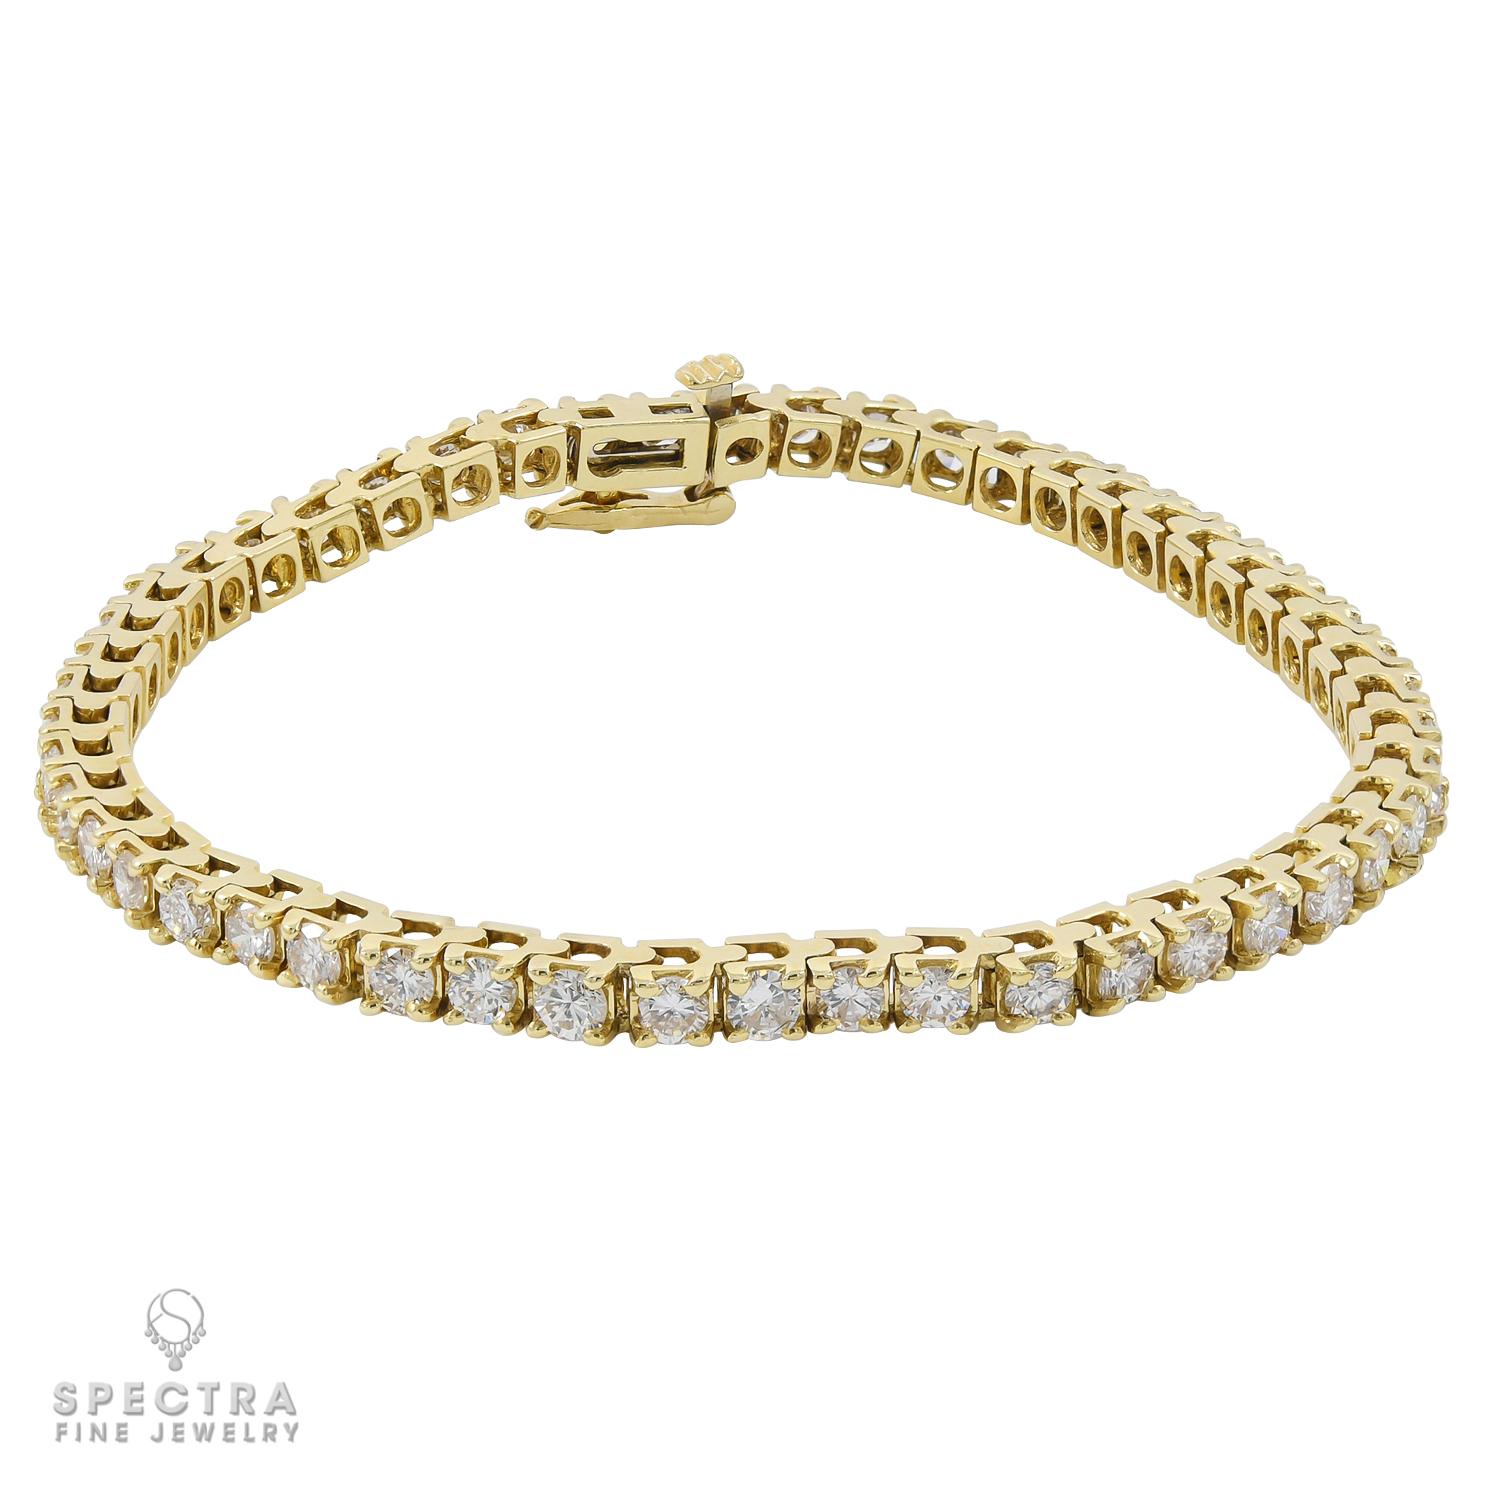 A classy tennis bracelet made with diamonds in 14k yellow gold.
50 diamonds weighing a total of 5 carats.
0.1 carat each. Diamonds are natural with H-I color, SI clarity.
7 inches long.
Gross weight 11.56 gram.